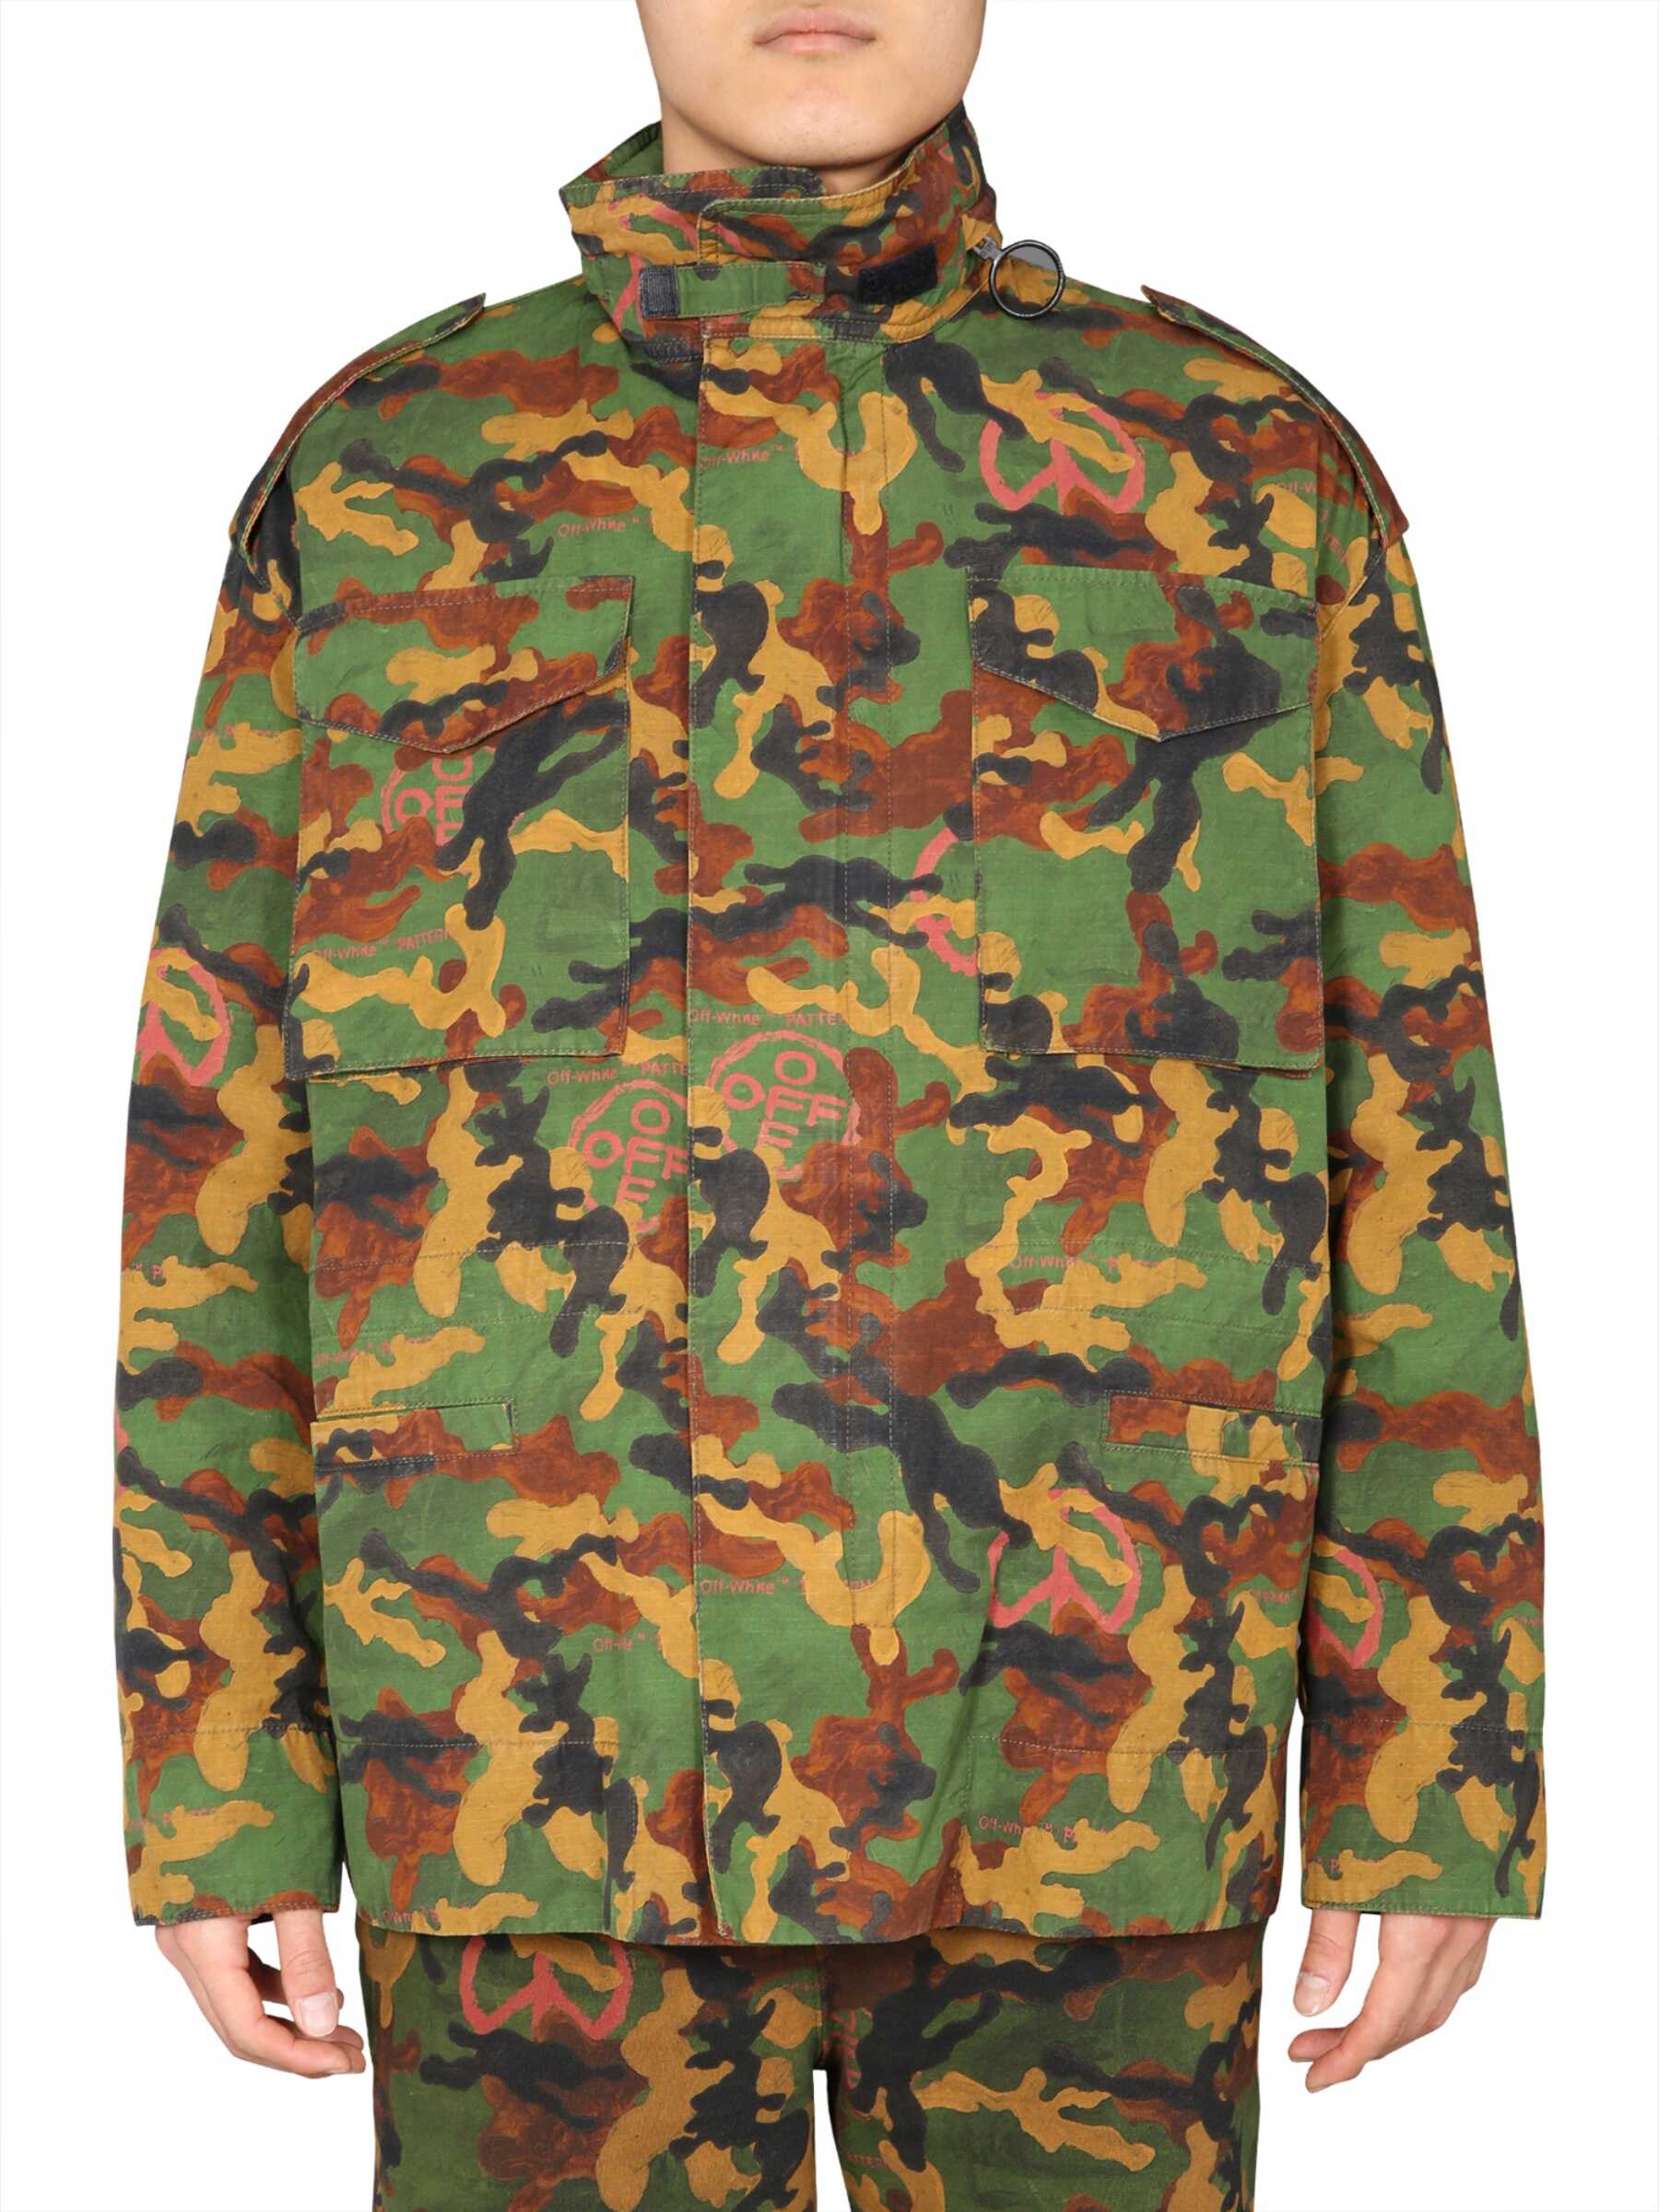 Off-White Padded Jacket MILITARY GREEN image5